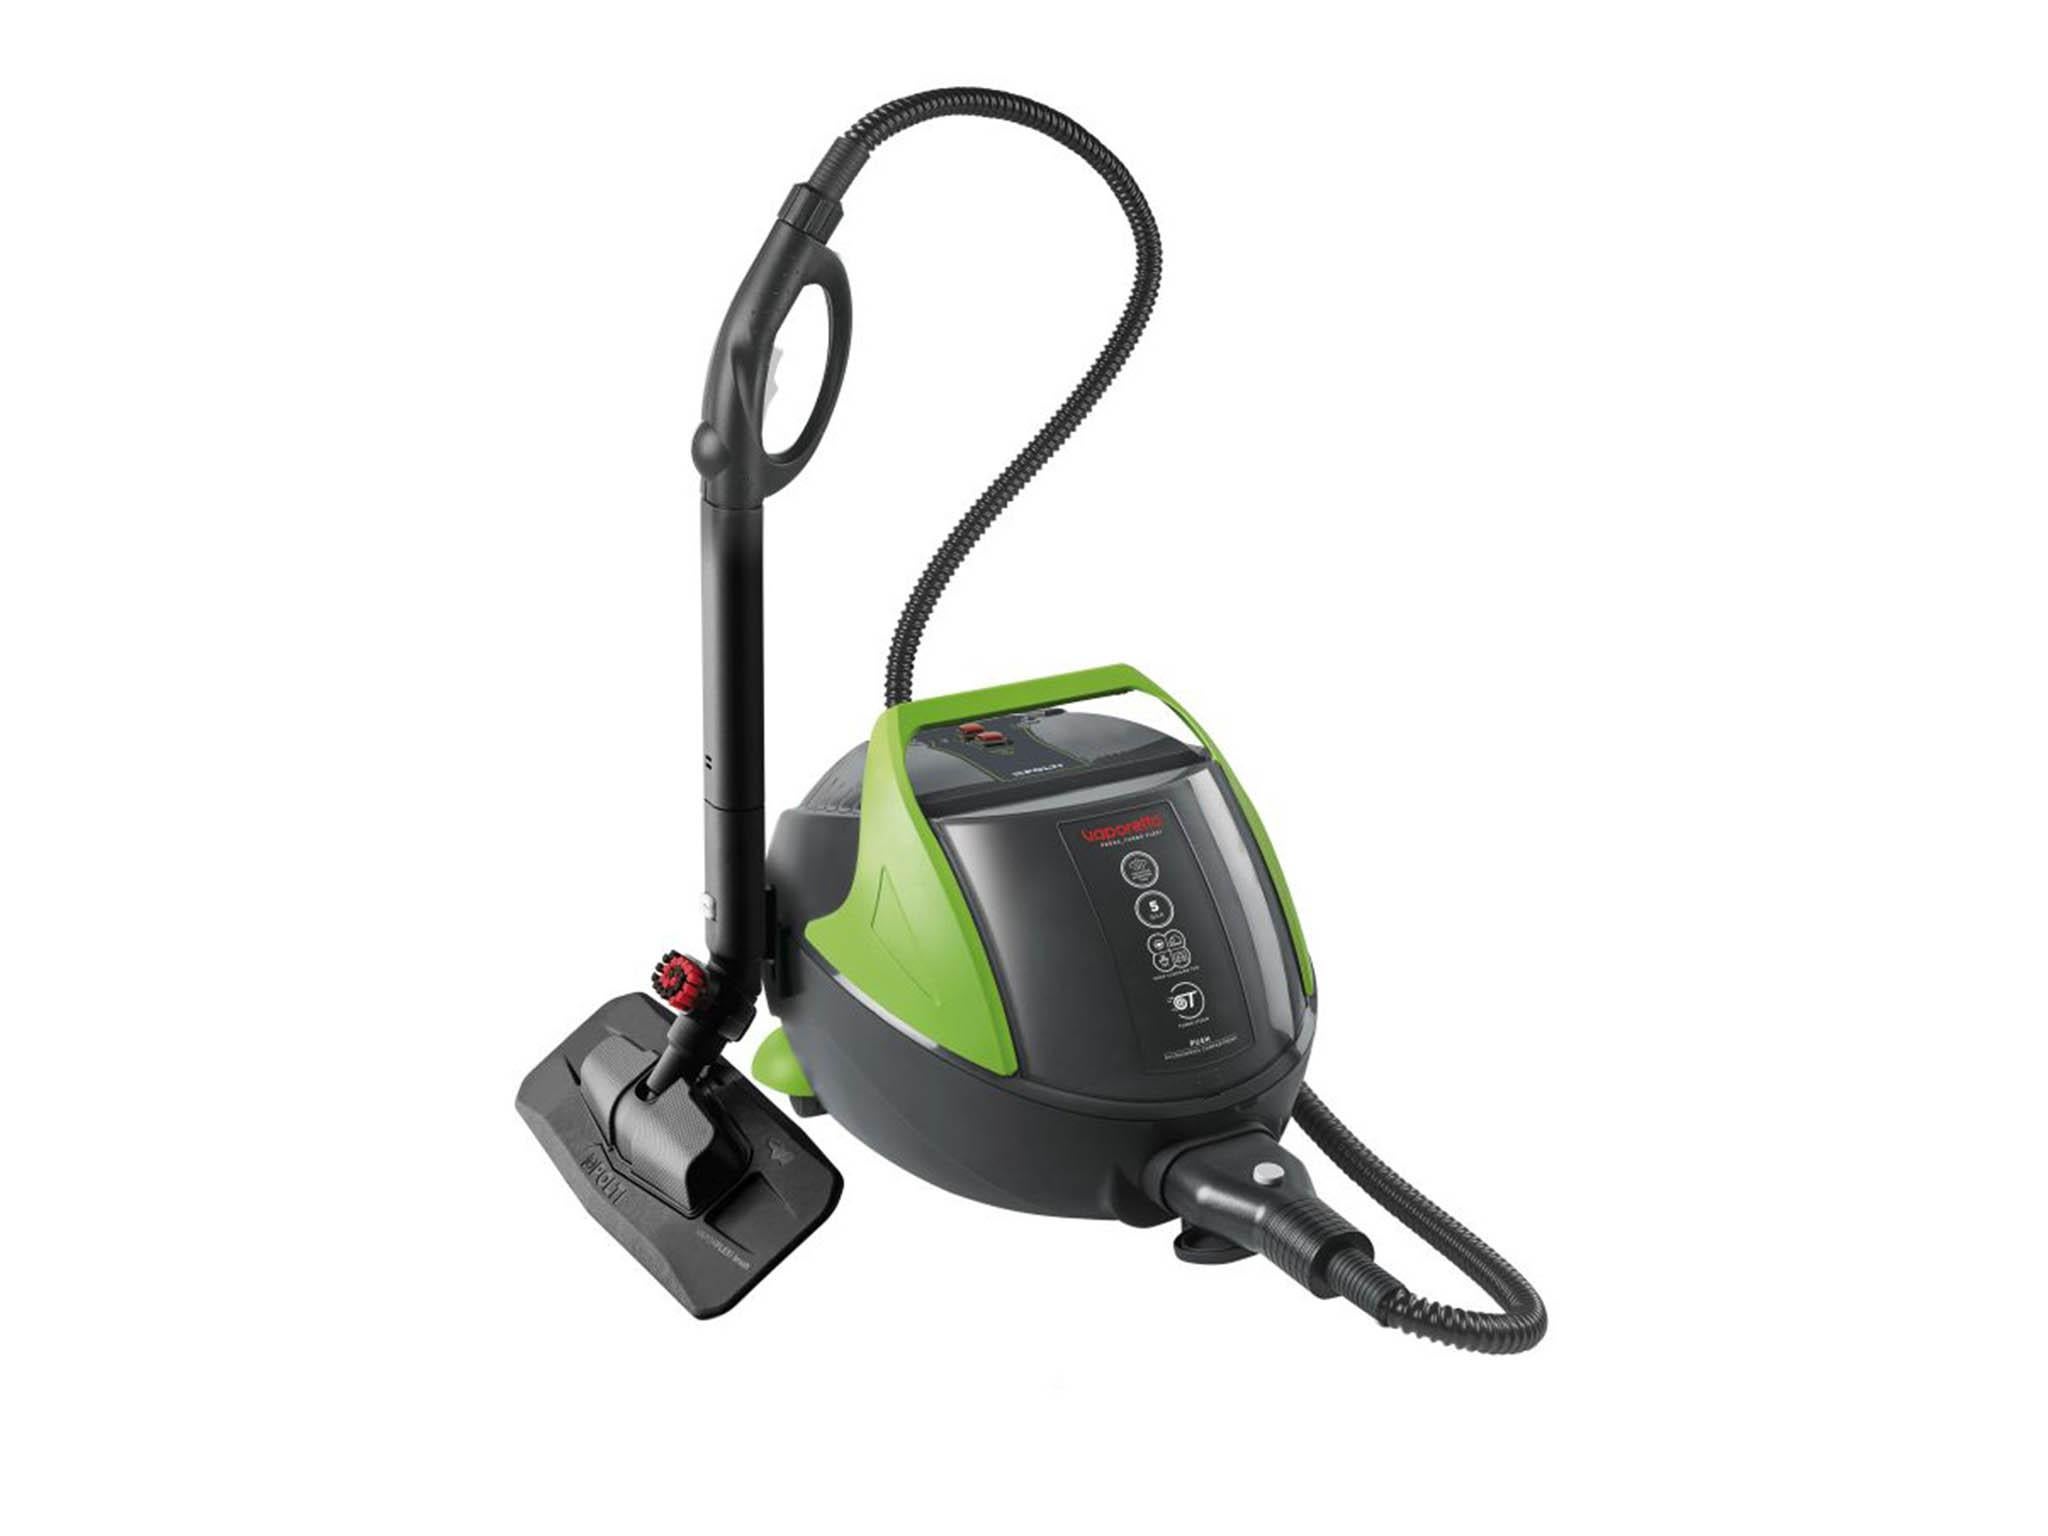 Best Steam Cleaners To Keep Your Floors And Surfaces Sparkling